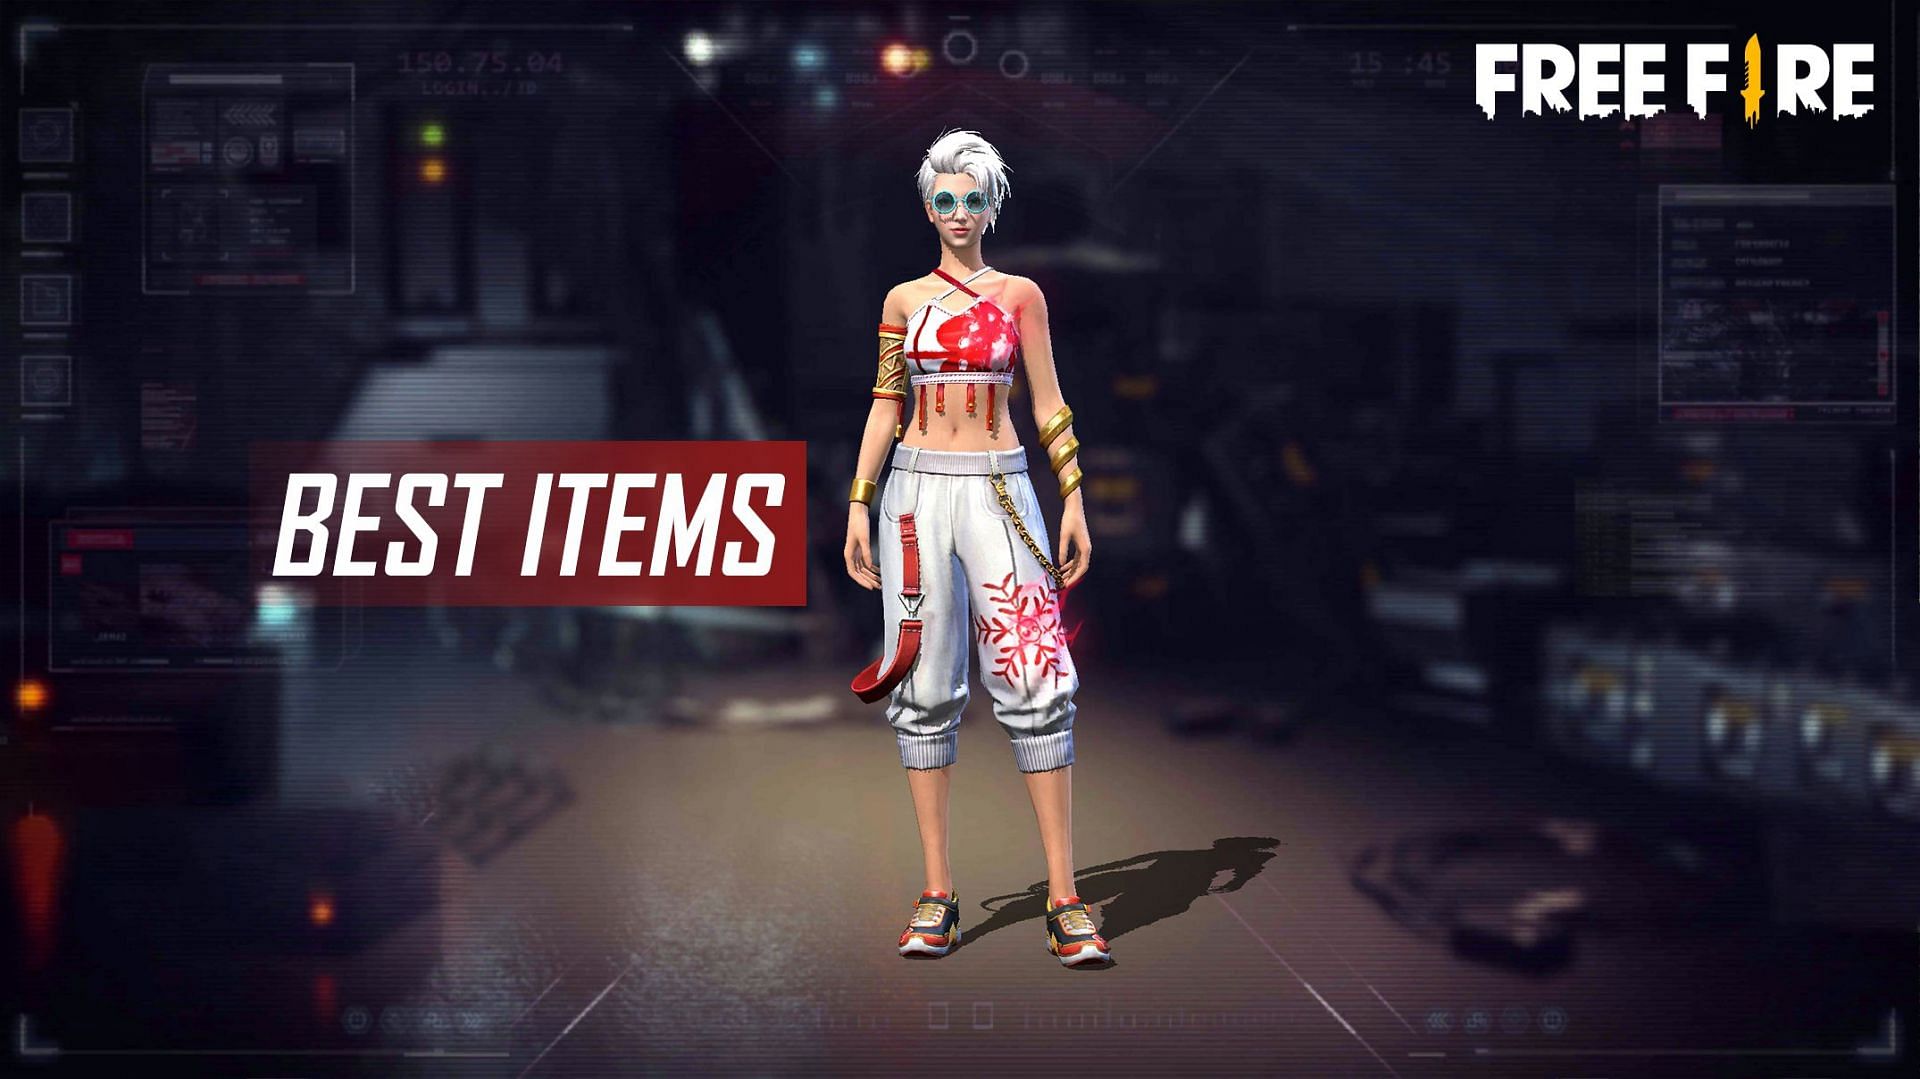 The Mystery Shop features several items (Image via Sportskeeda)